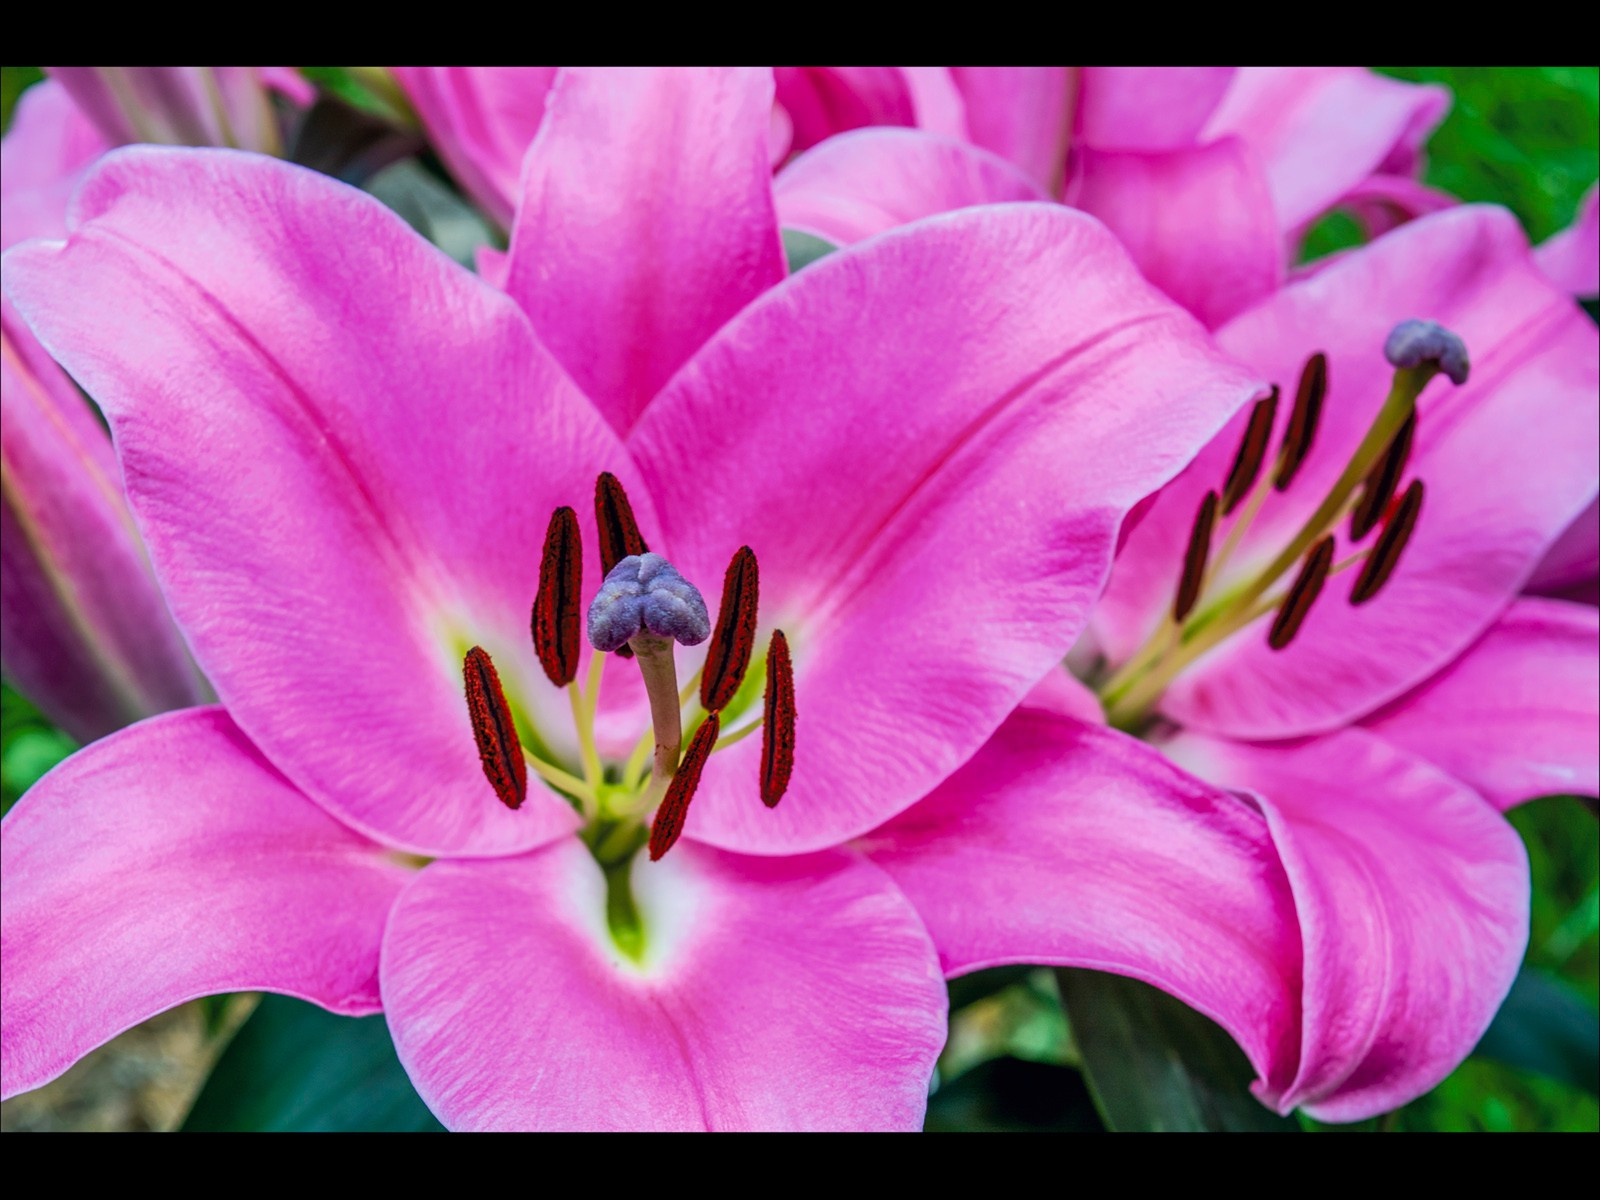 Stamens on Pink Lilies